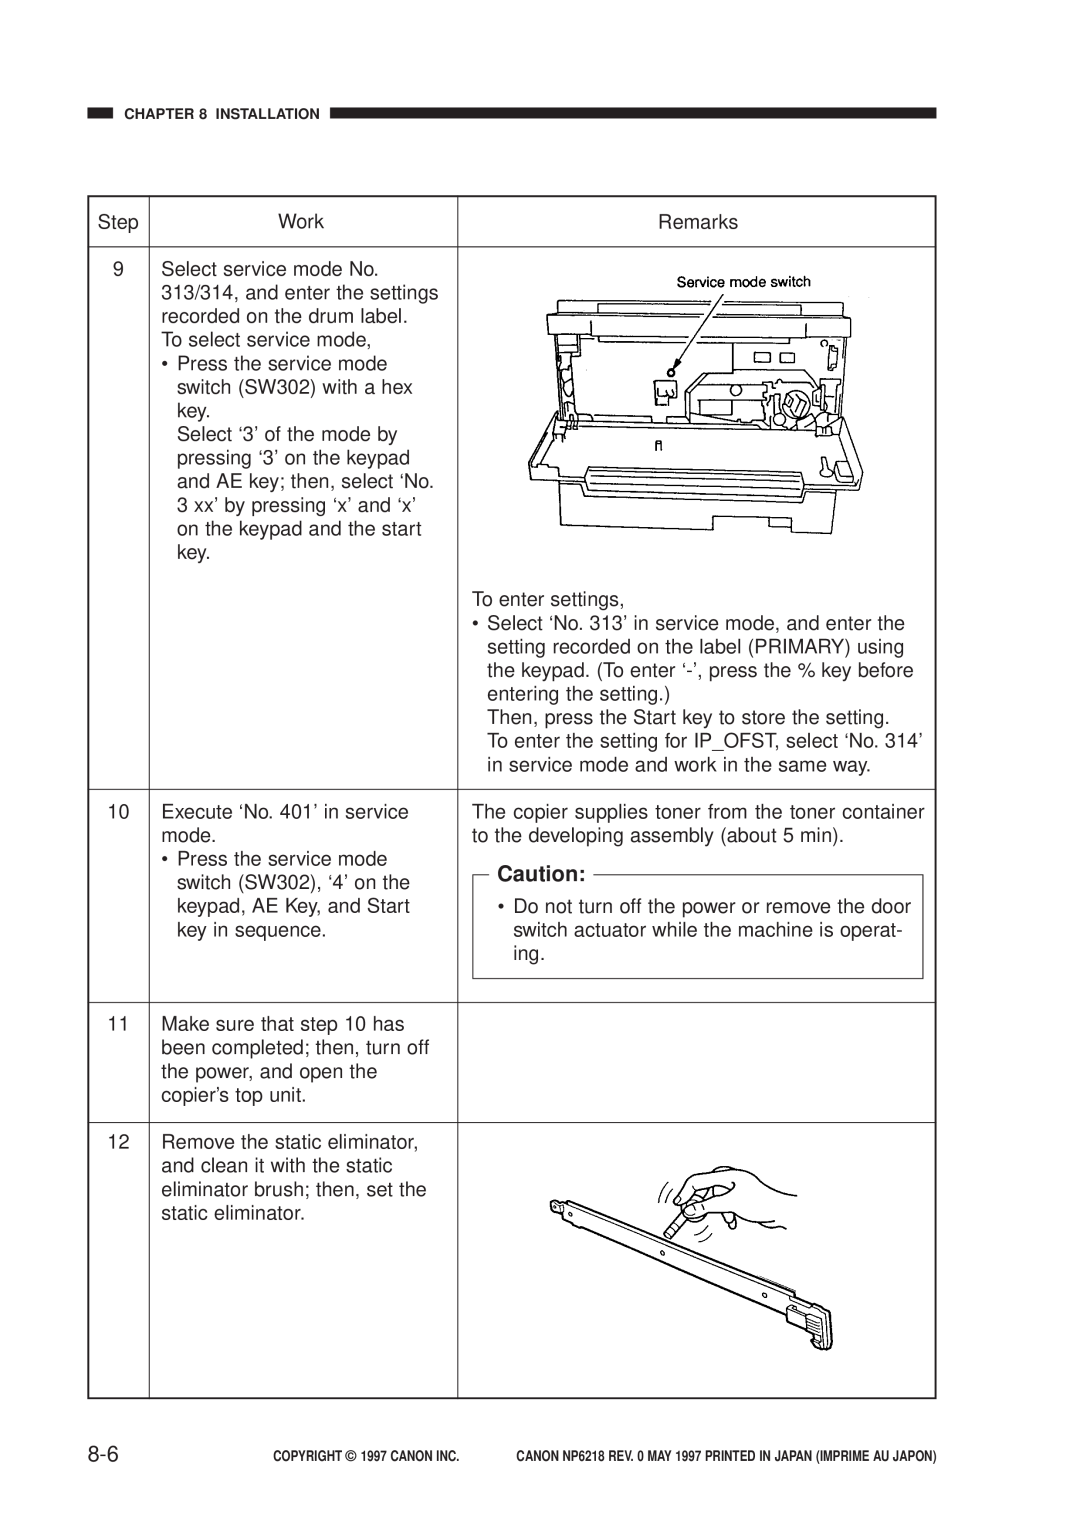 Canon NP6218, FY8-13EX-000 service manual Step 